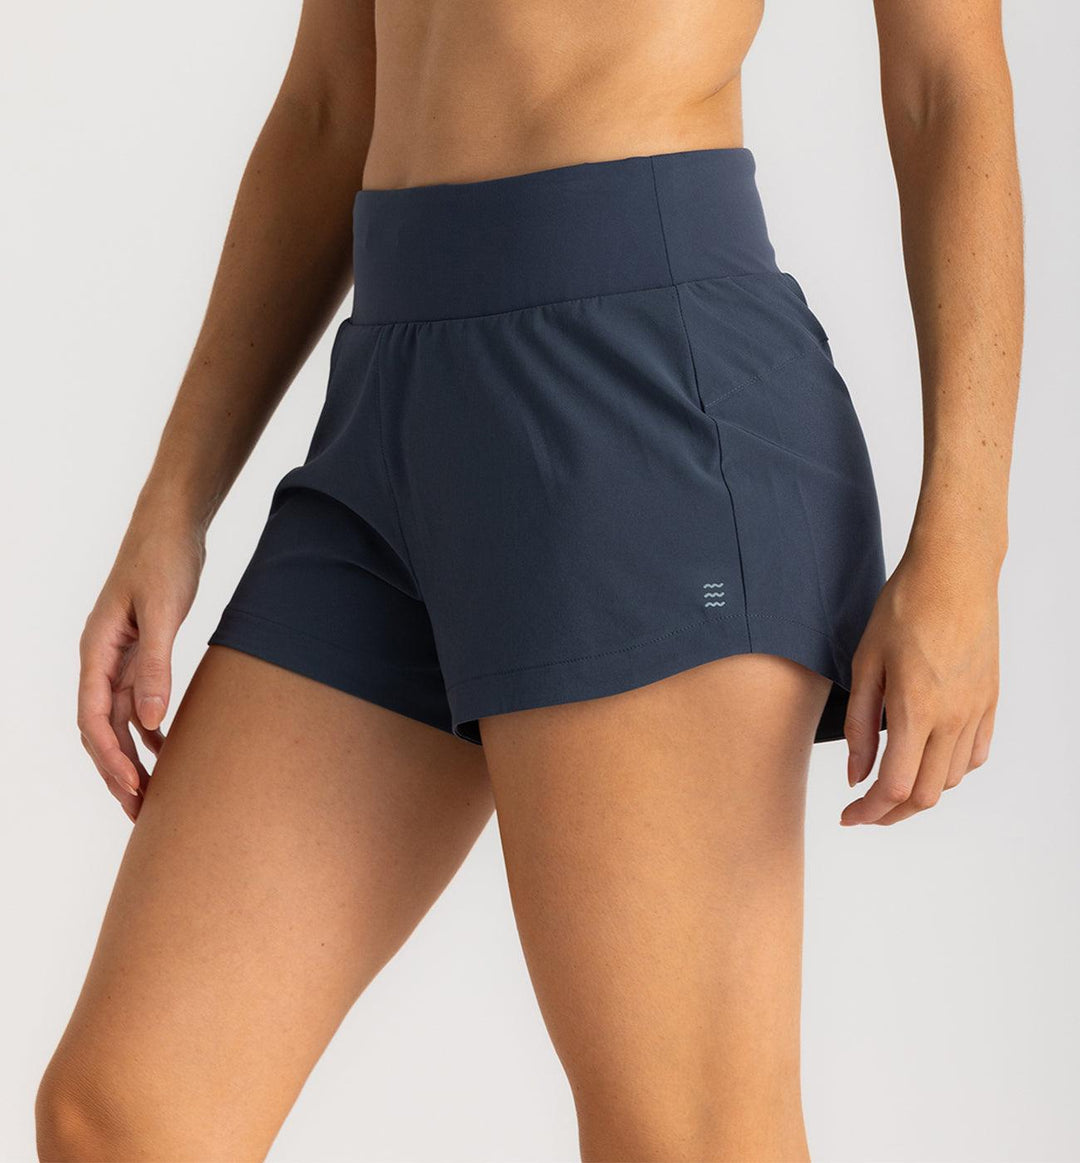 Women's Bamboo-Lined Active Breeze Short 3" - Davidson Provision Co.